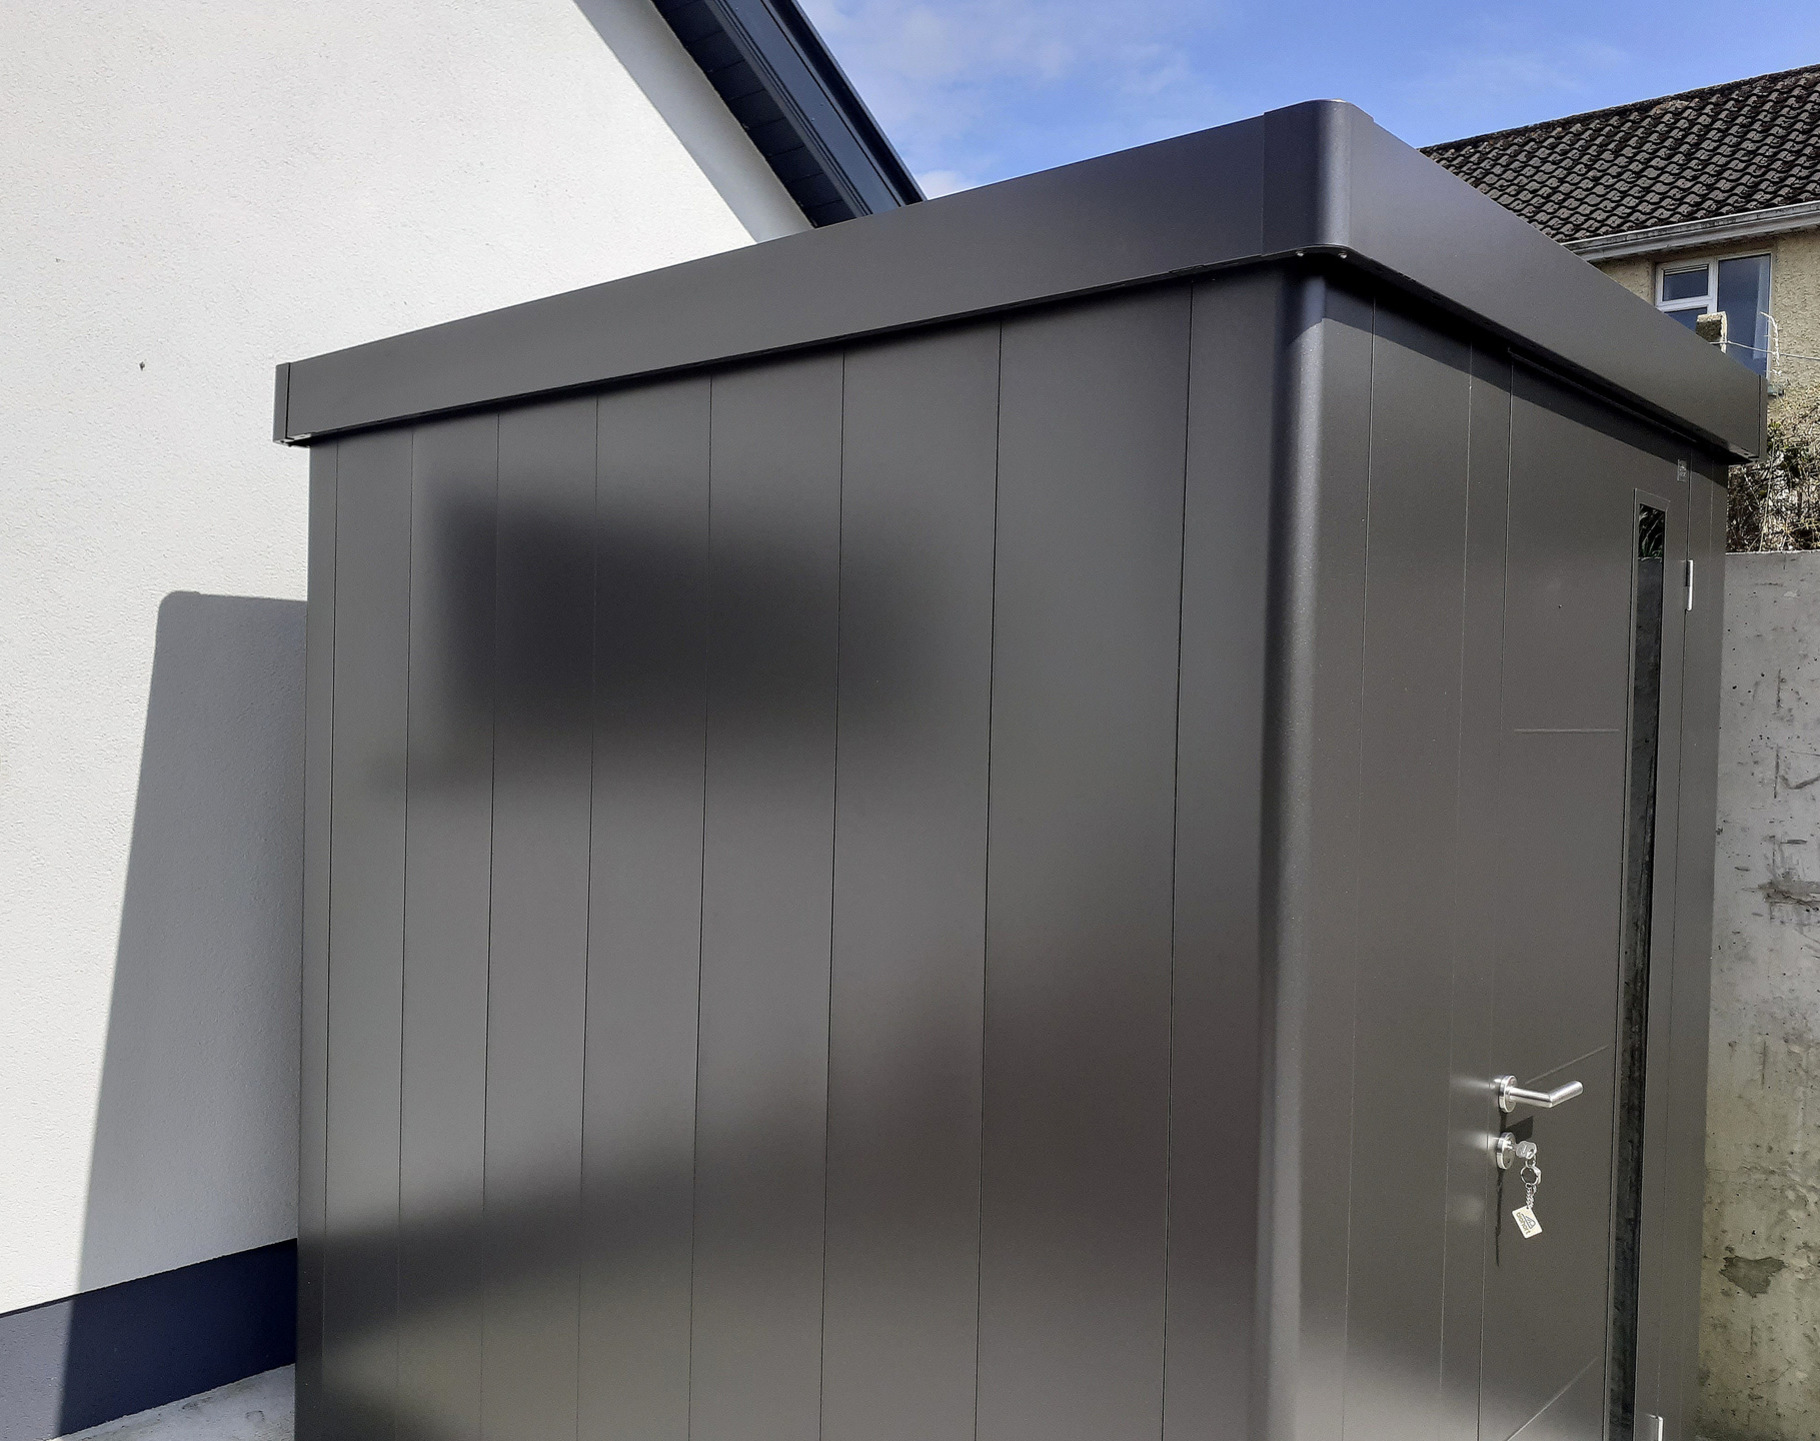 Biohort AvantGarde A5 Garden Shed in metallic dark grey  | supplied + fitted in Maynooth, Co Kildare